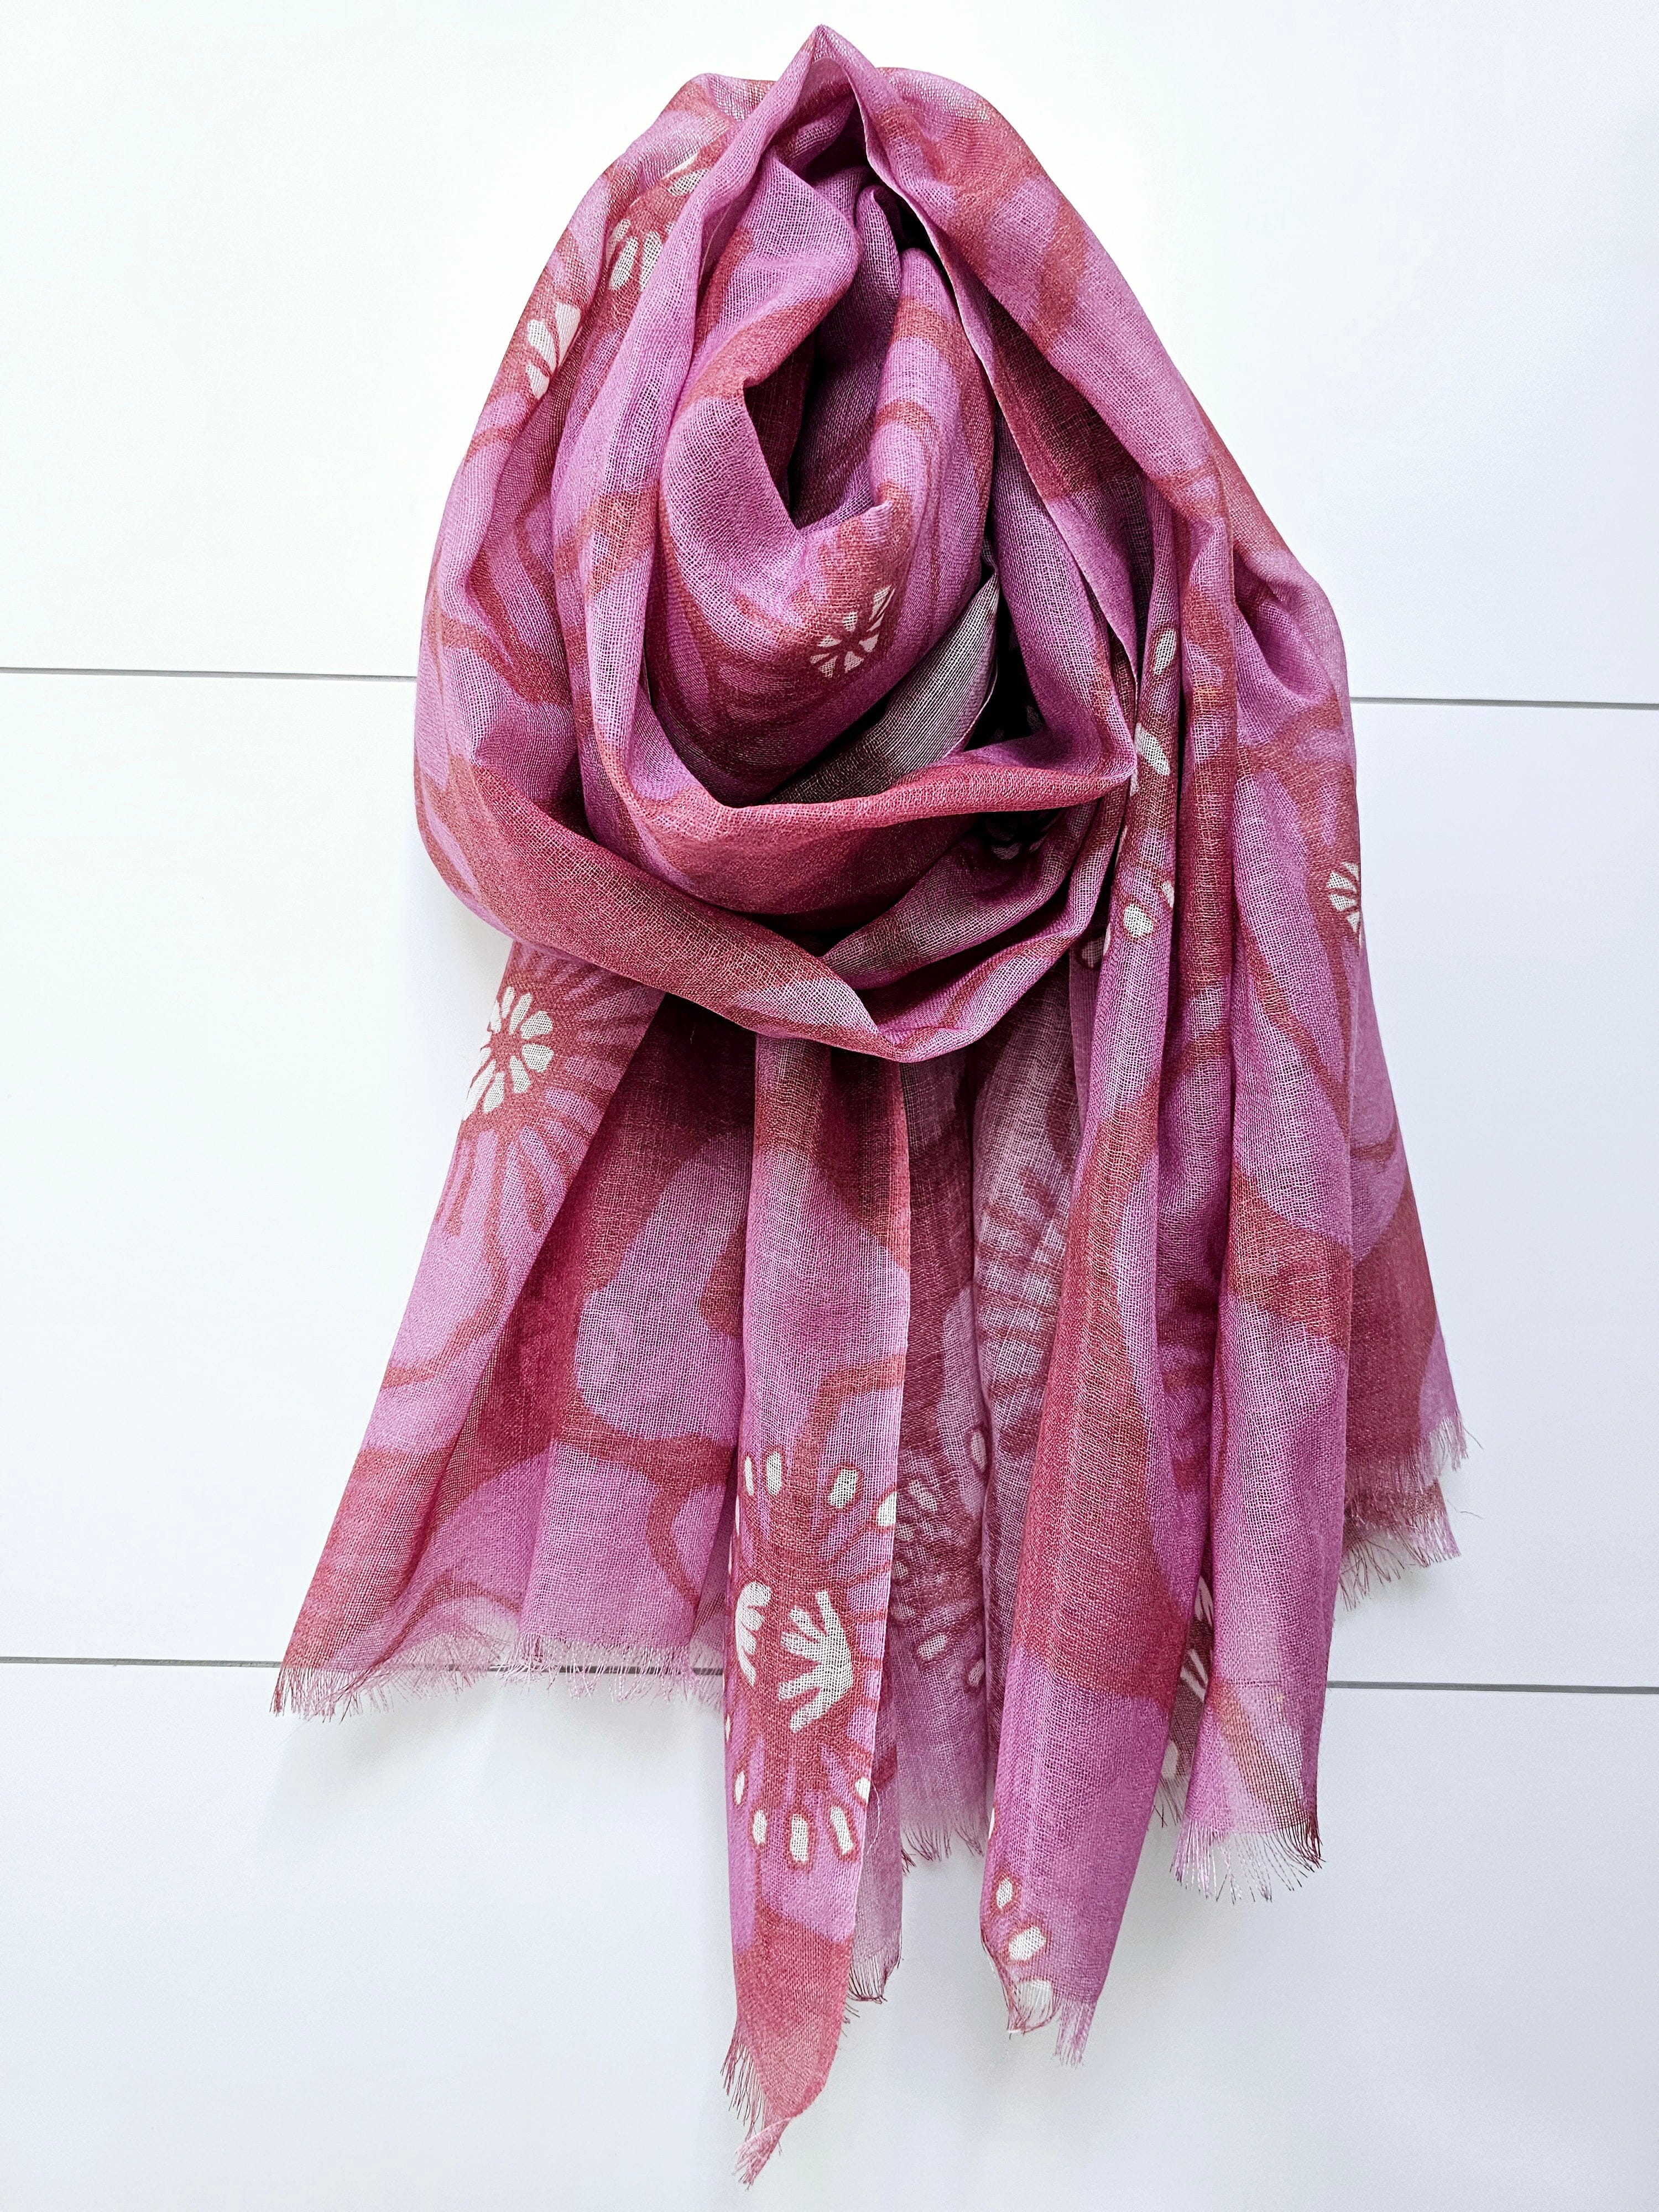 Printed Sheer Wool Scarves - Gift Boxed scarf The Spotted Quoll Tea Tree 